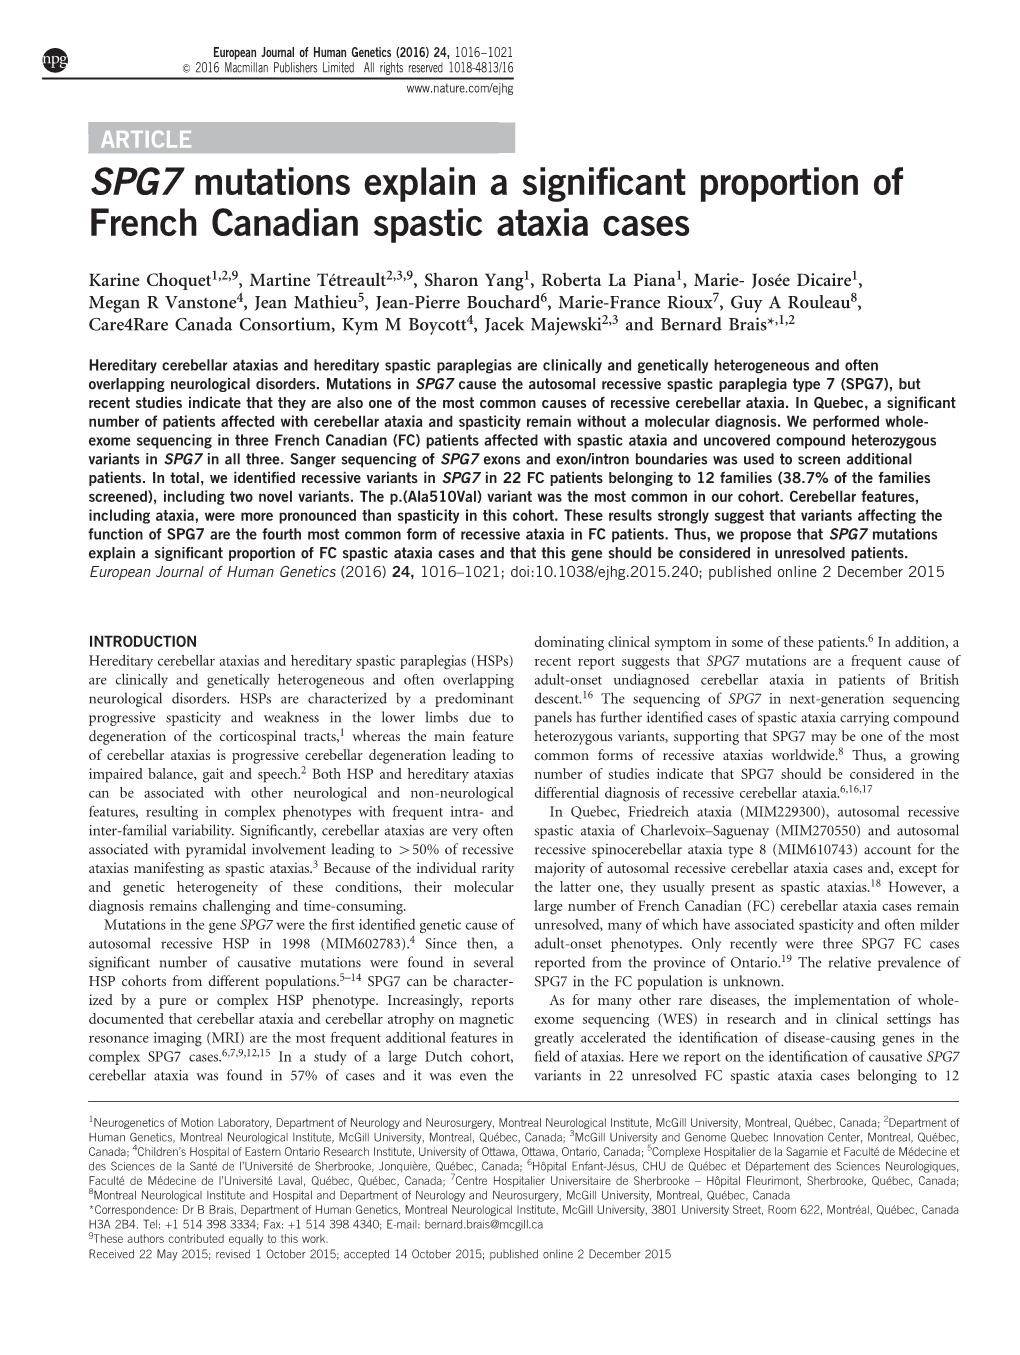 SPG7 Mutations Explain a Significant Proportion of French Canadian Spastic Ataxia Cases